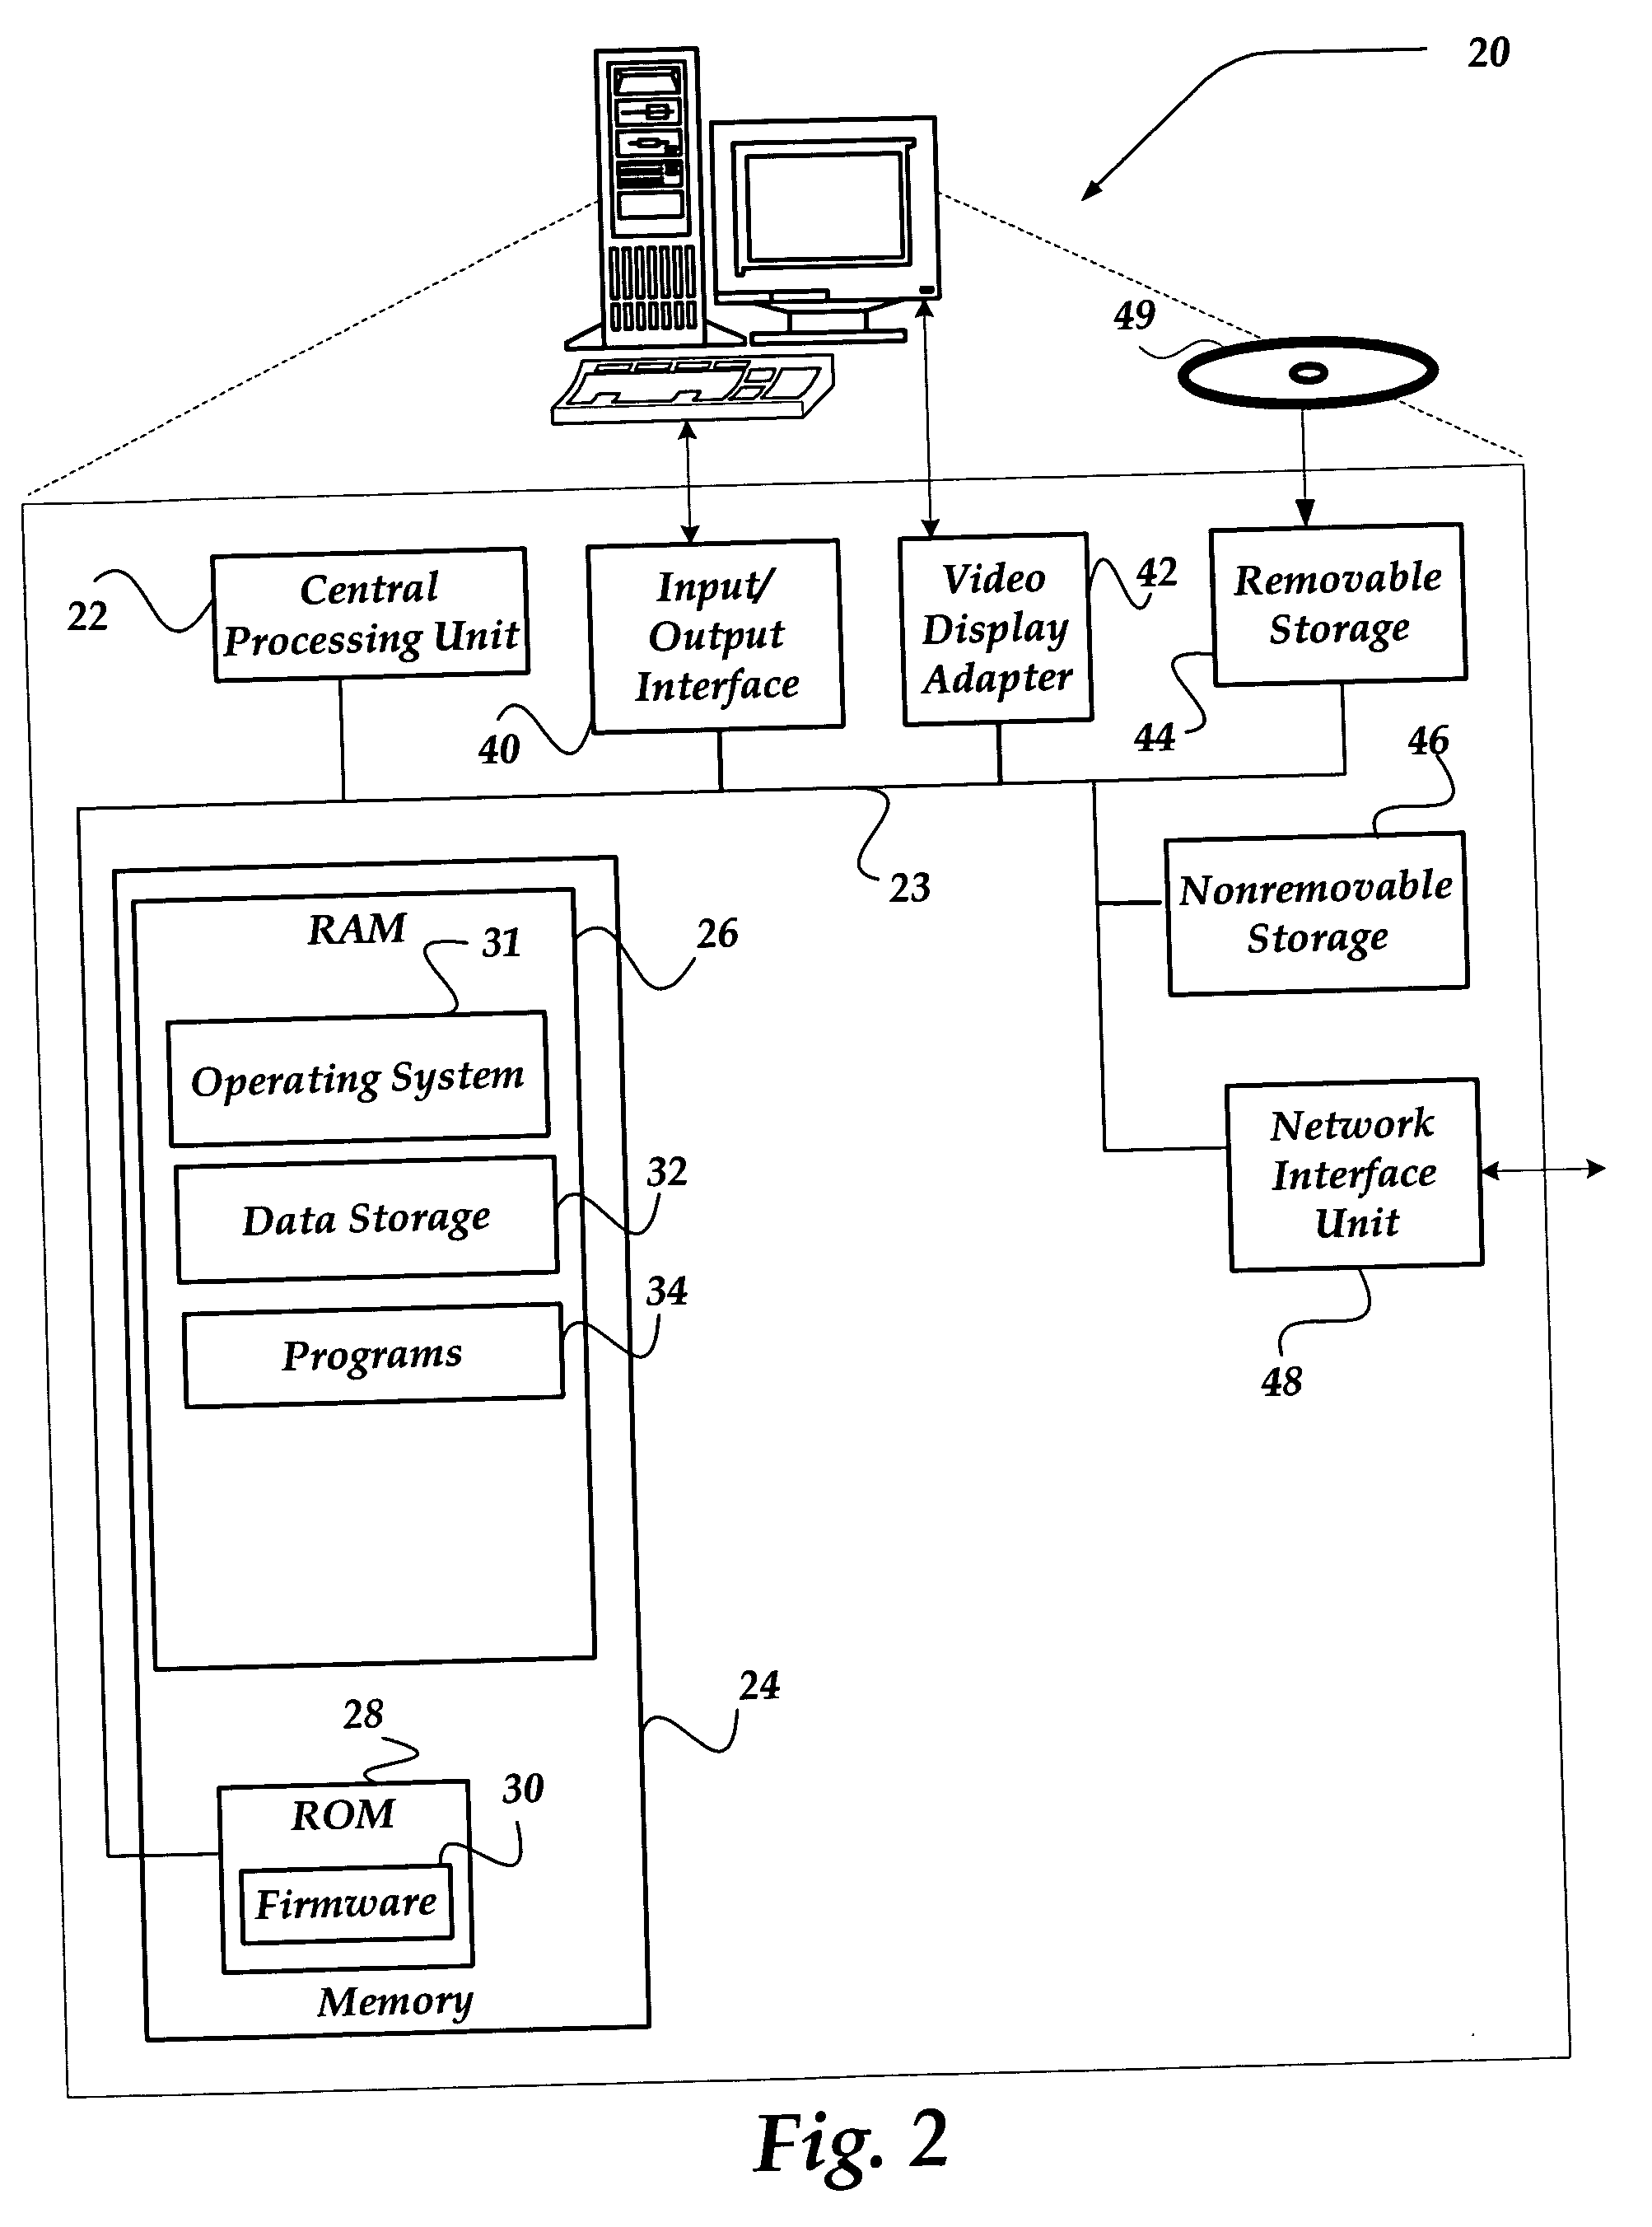 Establishing communication between a messaging client and a remote device